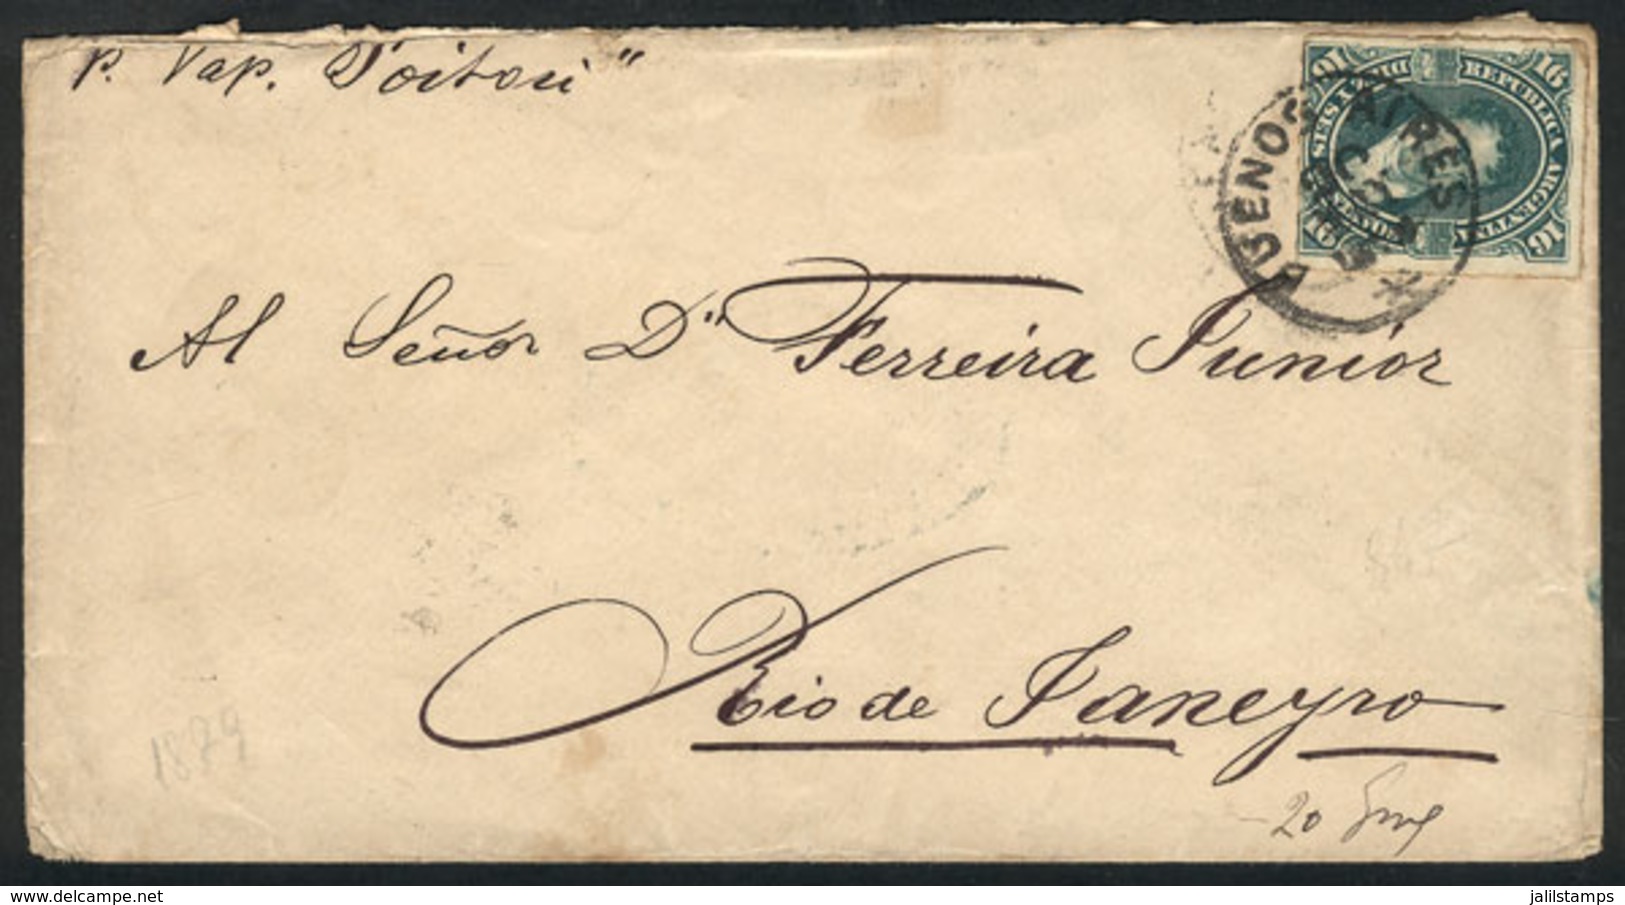 ARGENTINA: "GJ.50, 1876 Belgrano 16c. Rouletted, Franking A Cover Sent From Buenos Aires To RIO DE JANEIRO (Brazil) On 2 - Gebruikt